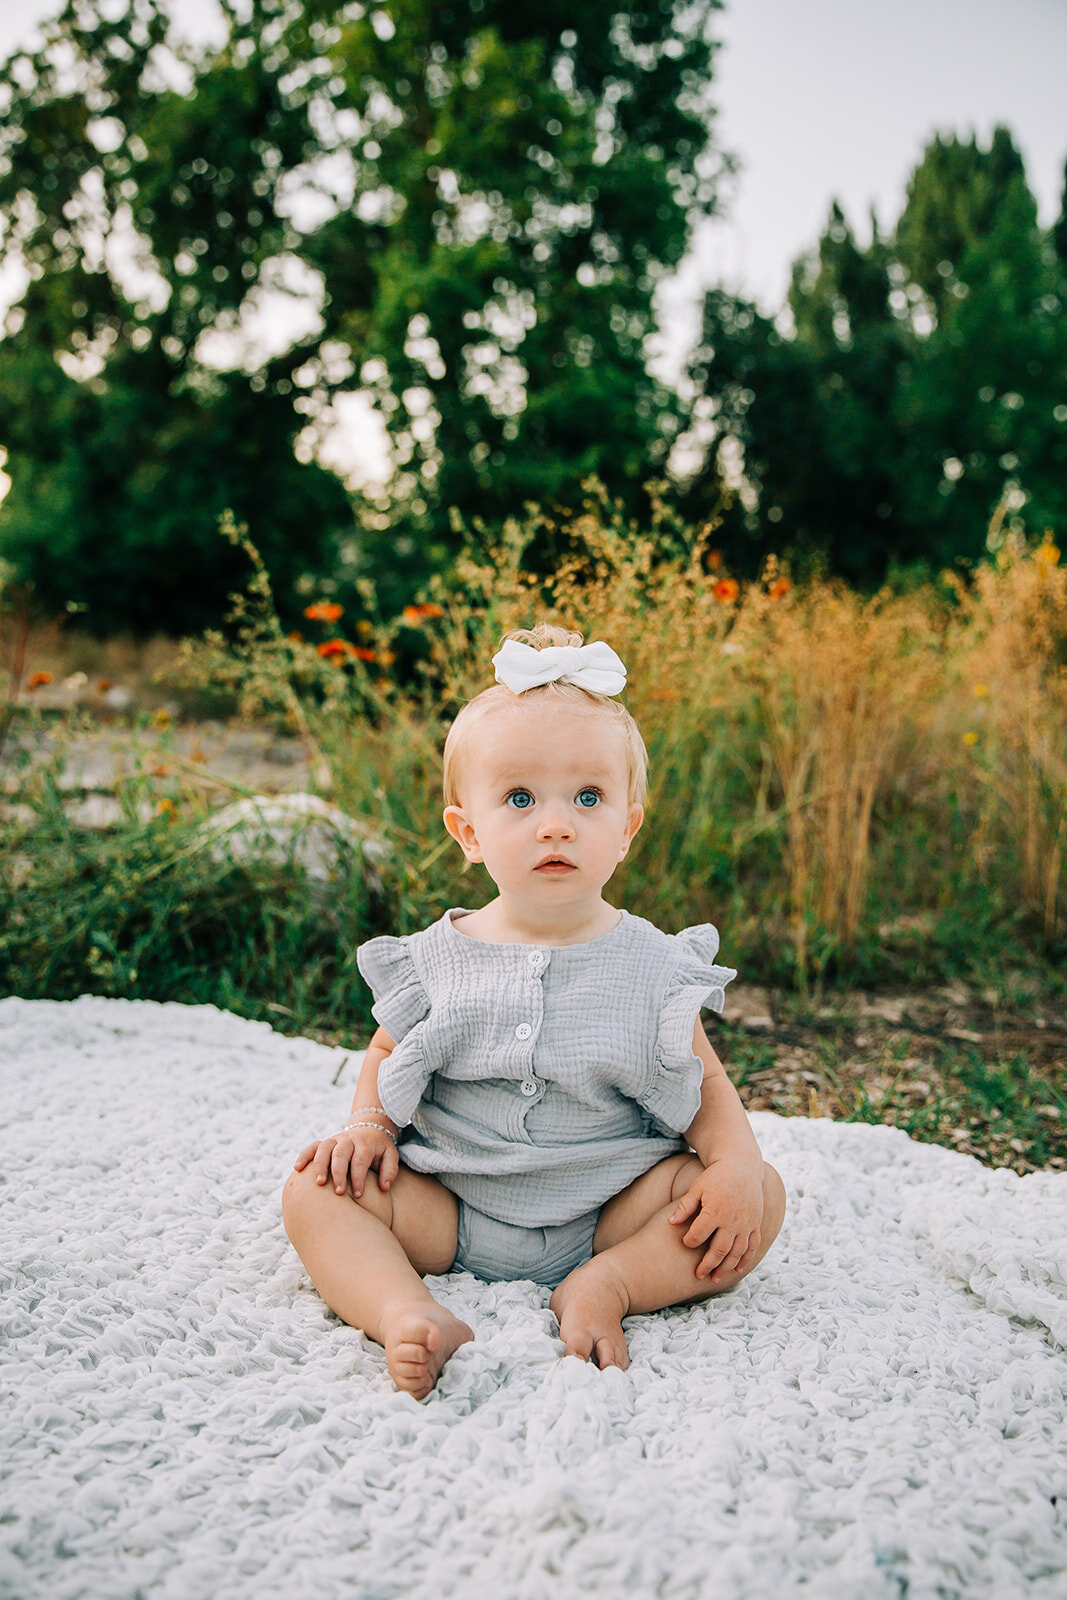  first birthday photoshoot baby girl baby posing inspo sitting down posing ideas kids fashion baby fashion inspo what to wear hair inspo tall grass summer time child model beautiful baby turning one birthday photos milestone birthday cache valley pho